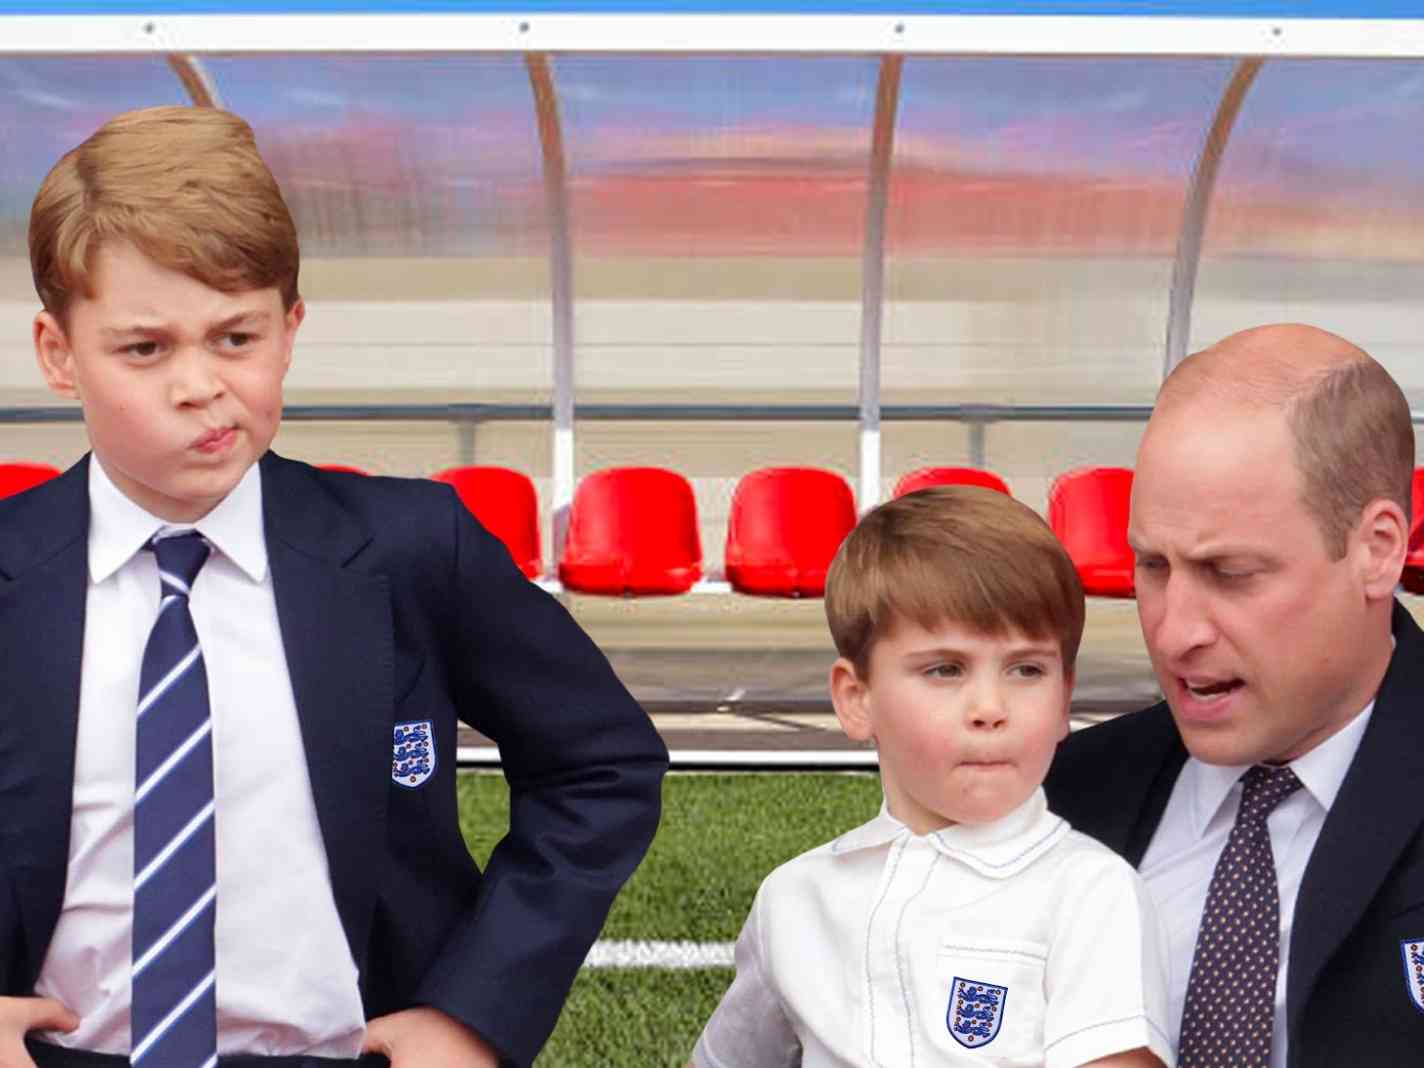 Photo of Prince George, Prince Louis and Prince William with a football bench in the background